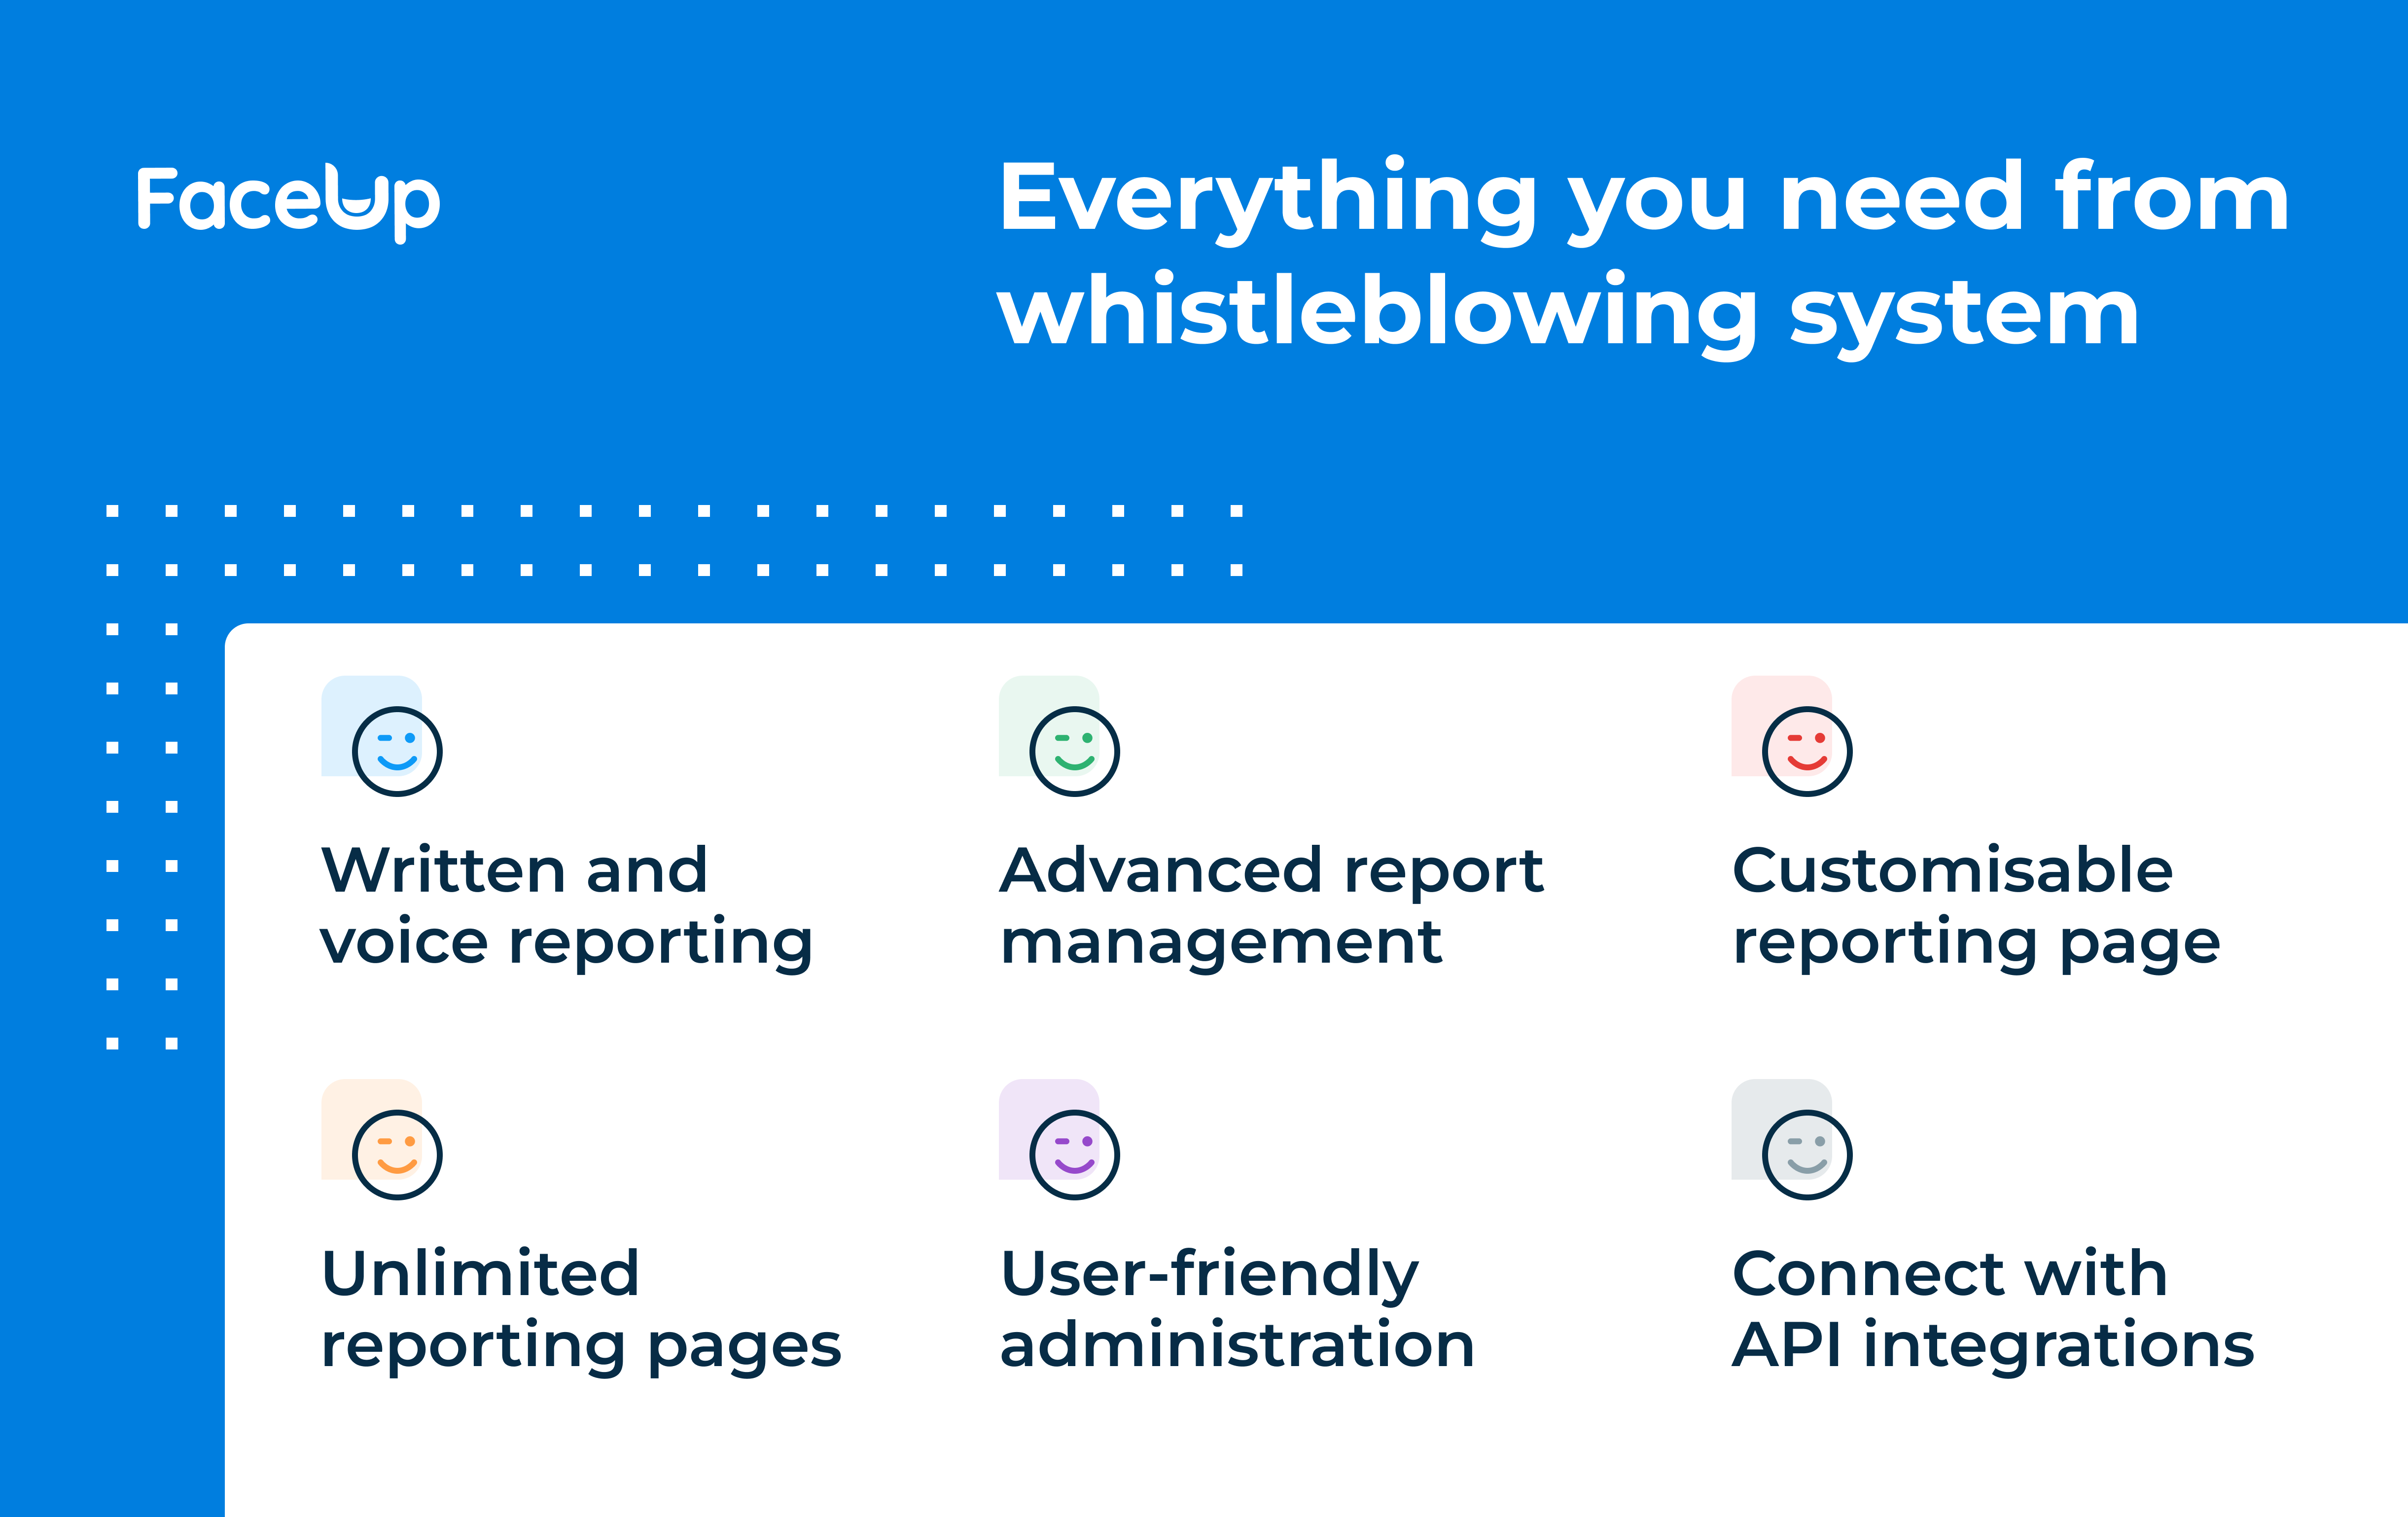 FaceUp Whistleblowing System Software - You can set up your own reporting page, categories, organisational structure, add members and 3rd parties. There are many useful features such as internal comments, working hours, deadlines, priorities, labels and much more.